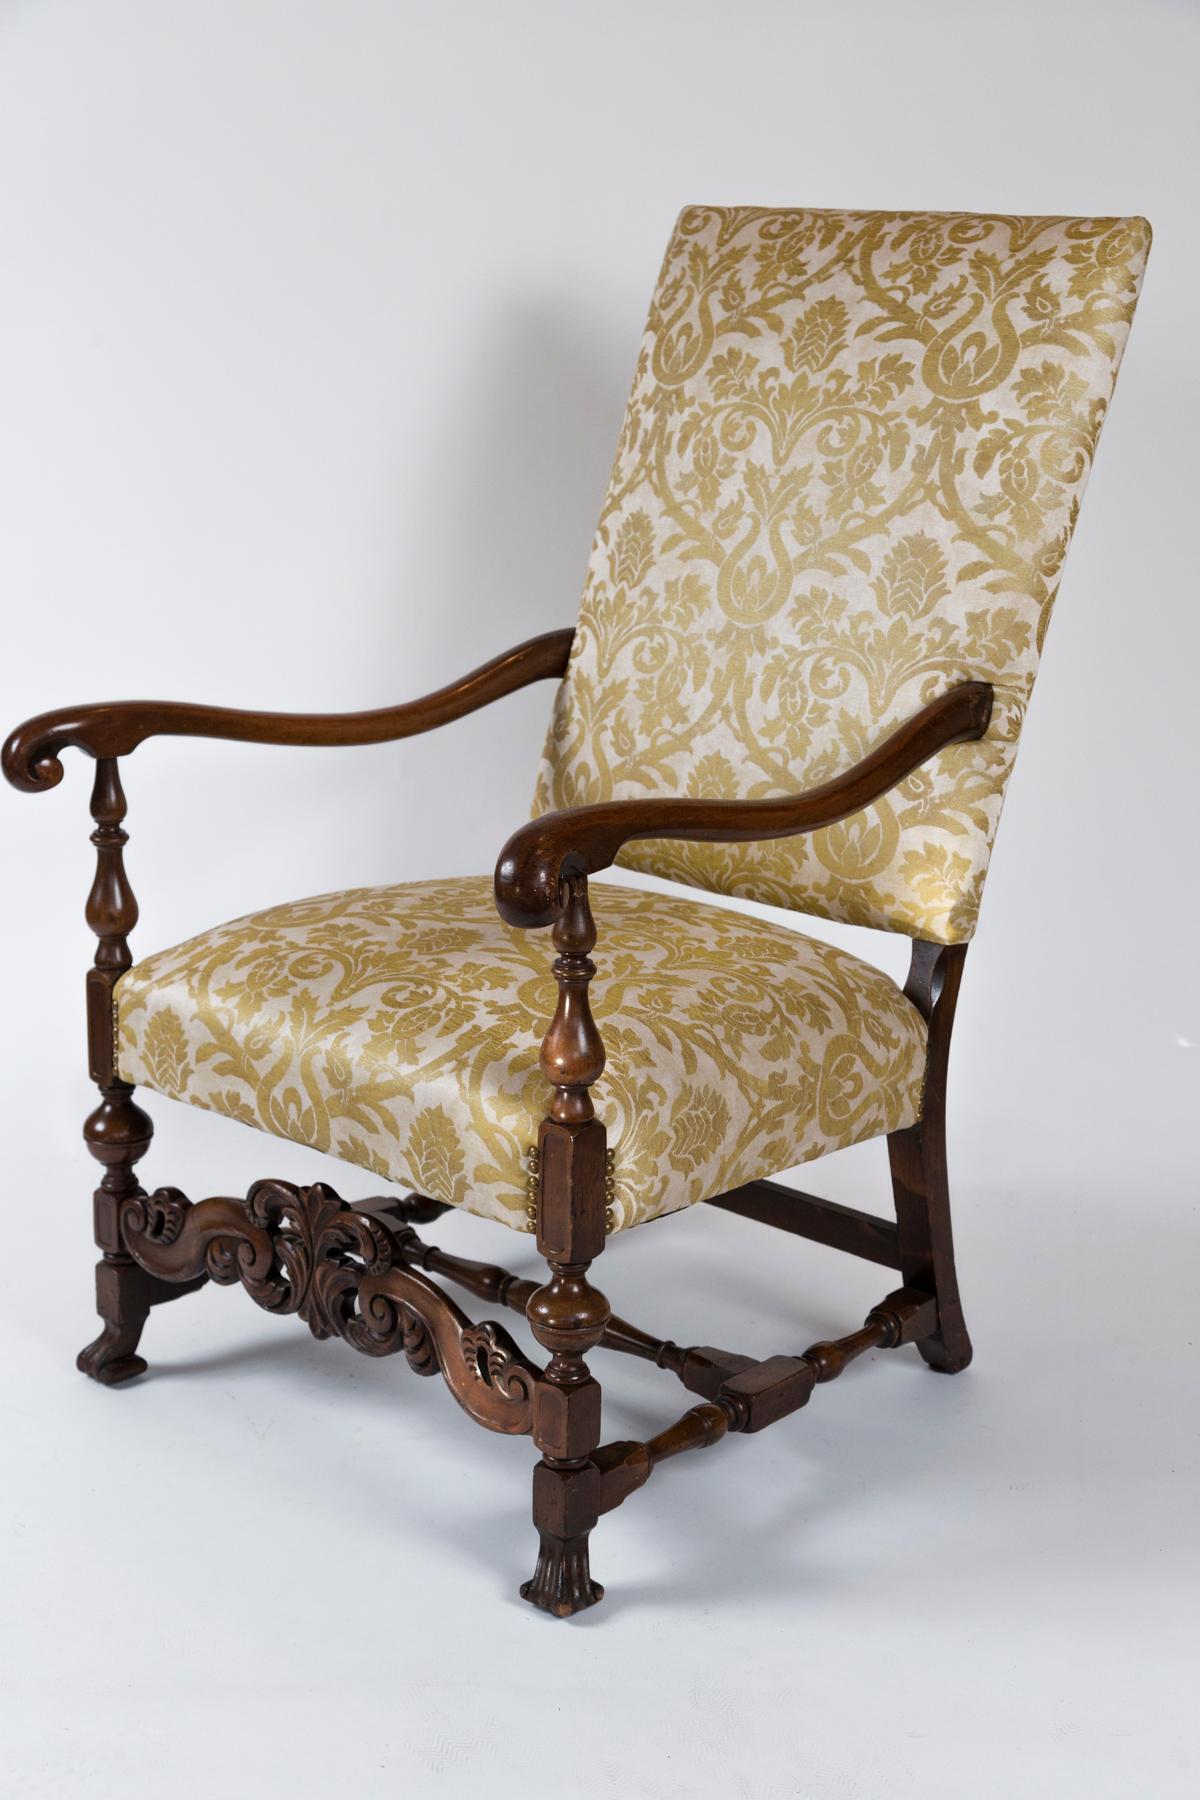 Late 19th century European Arm Chair. Tall back upholstered chair with lovely silk fabric in like-new condition. Finely carved front apron with stretcher. Elegant turned arms and legs with front claw shape feet.